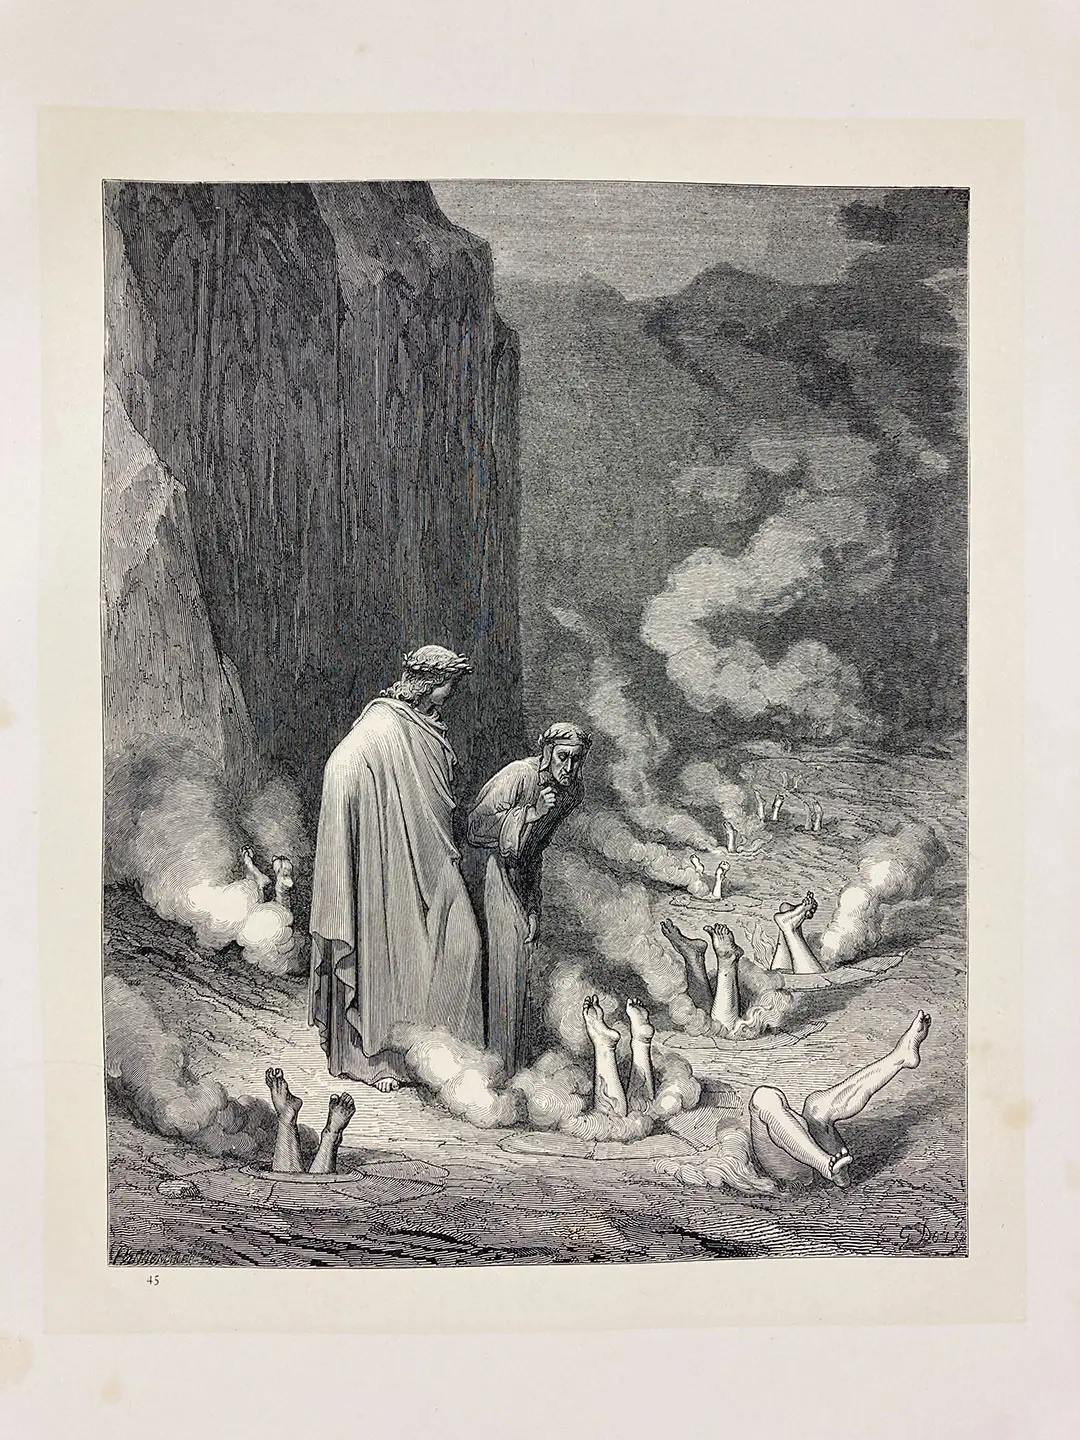 The vision of hell by Dante Alighieri